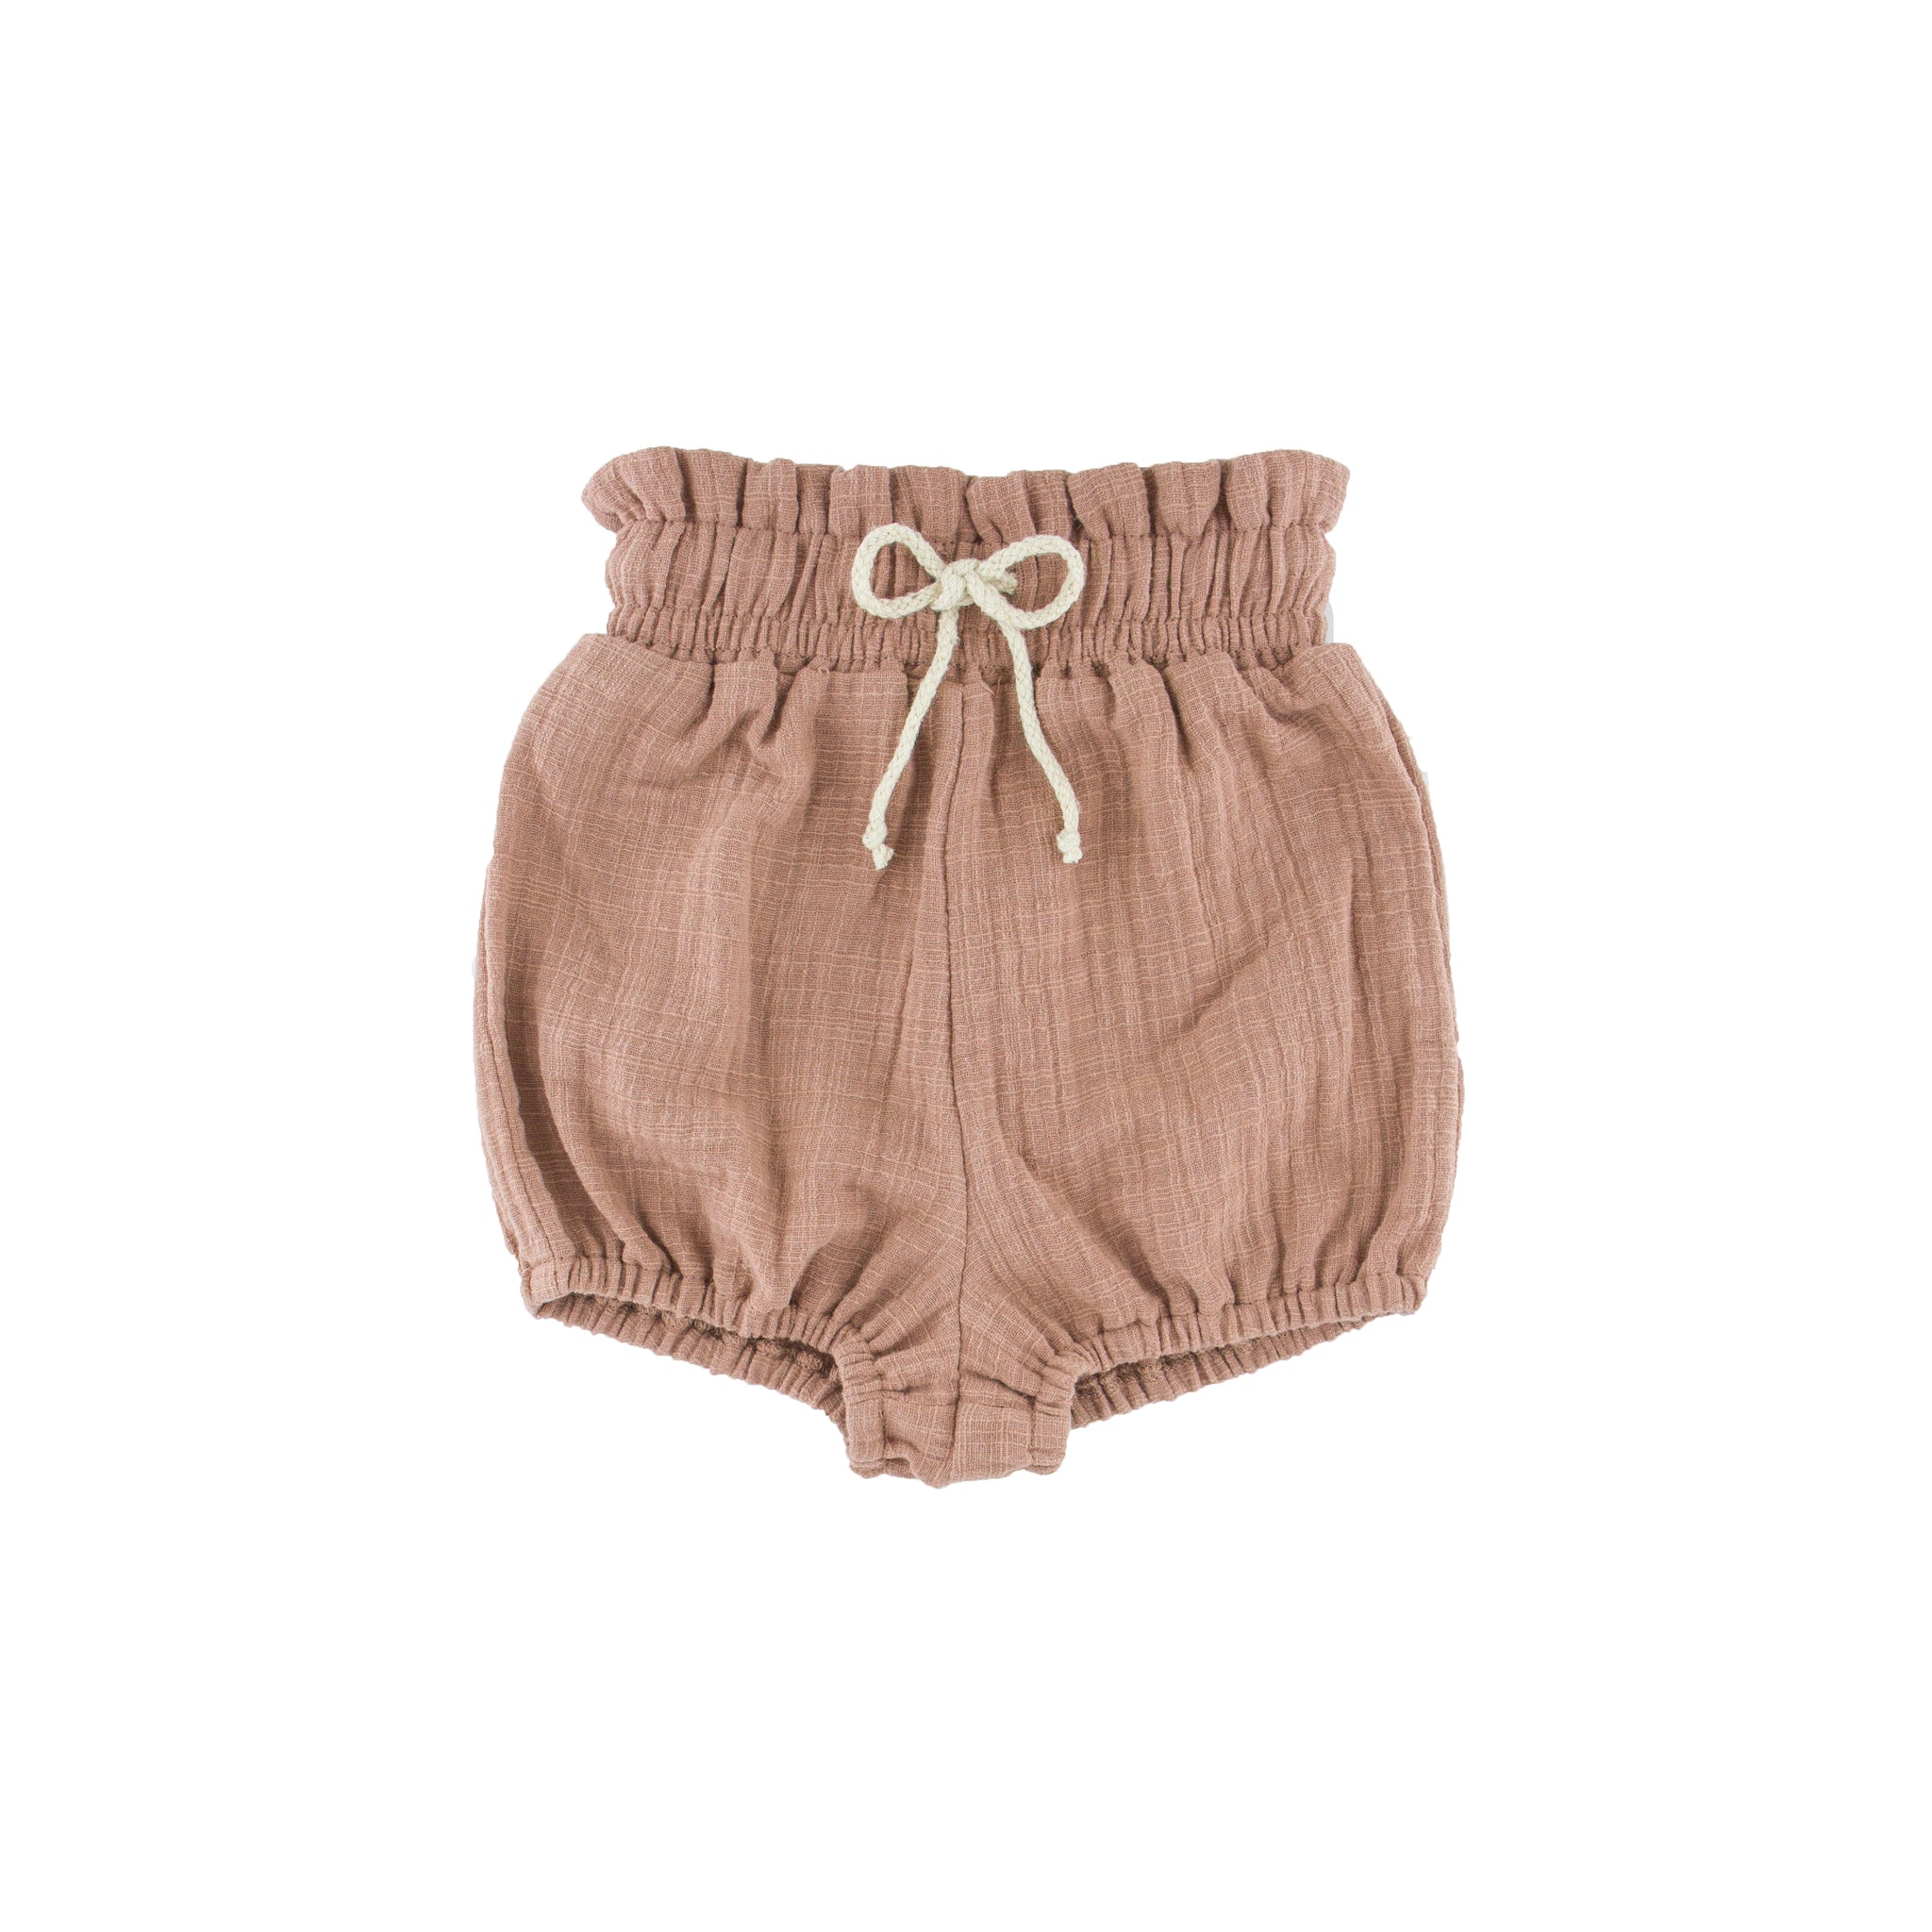 Baby Girl's Chlochlo bloomer - Caramel - 6months-4years - Linen Baby Cotton